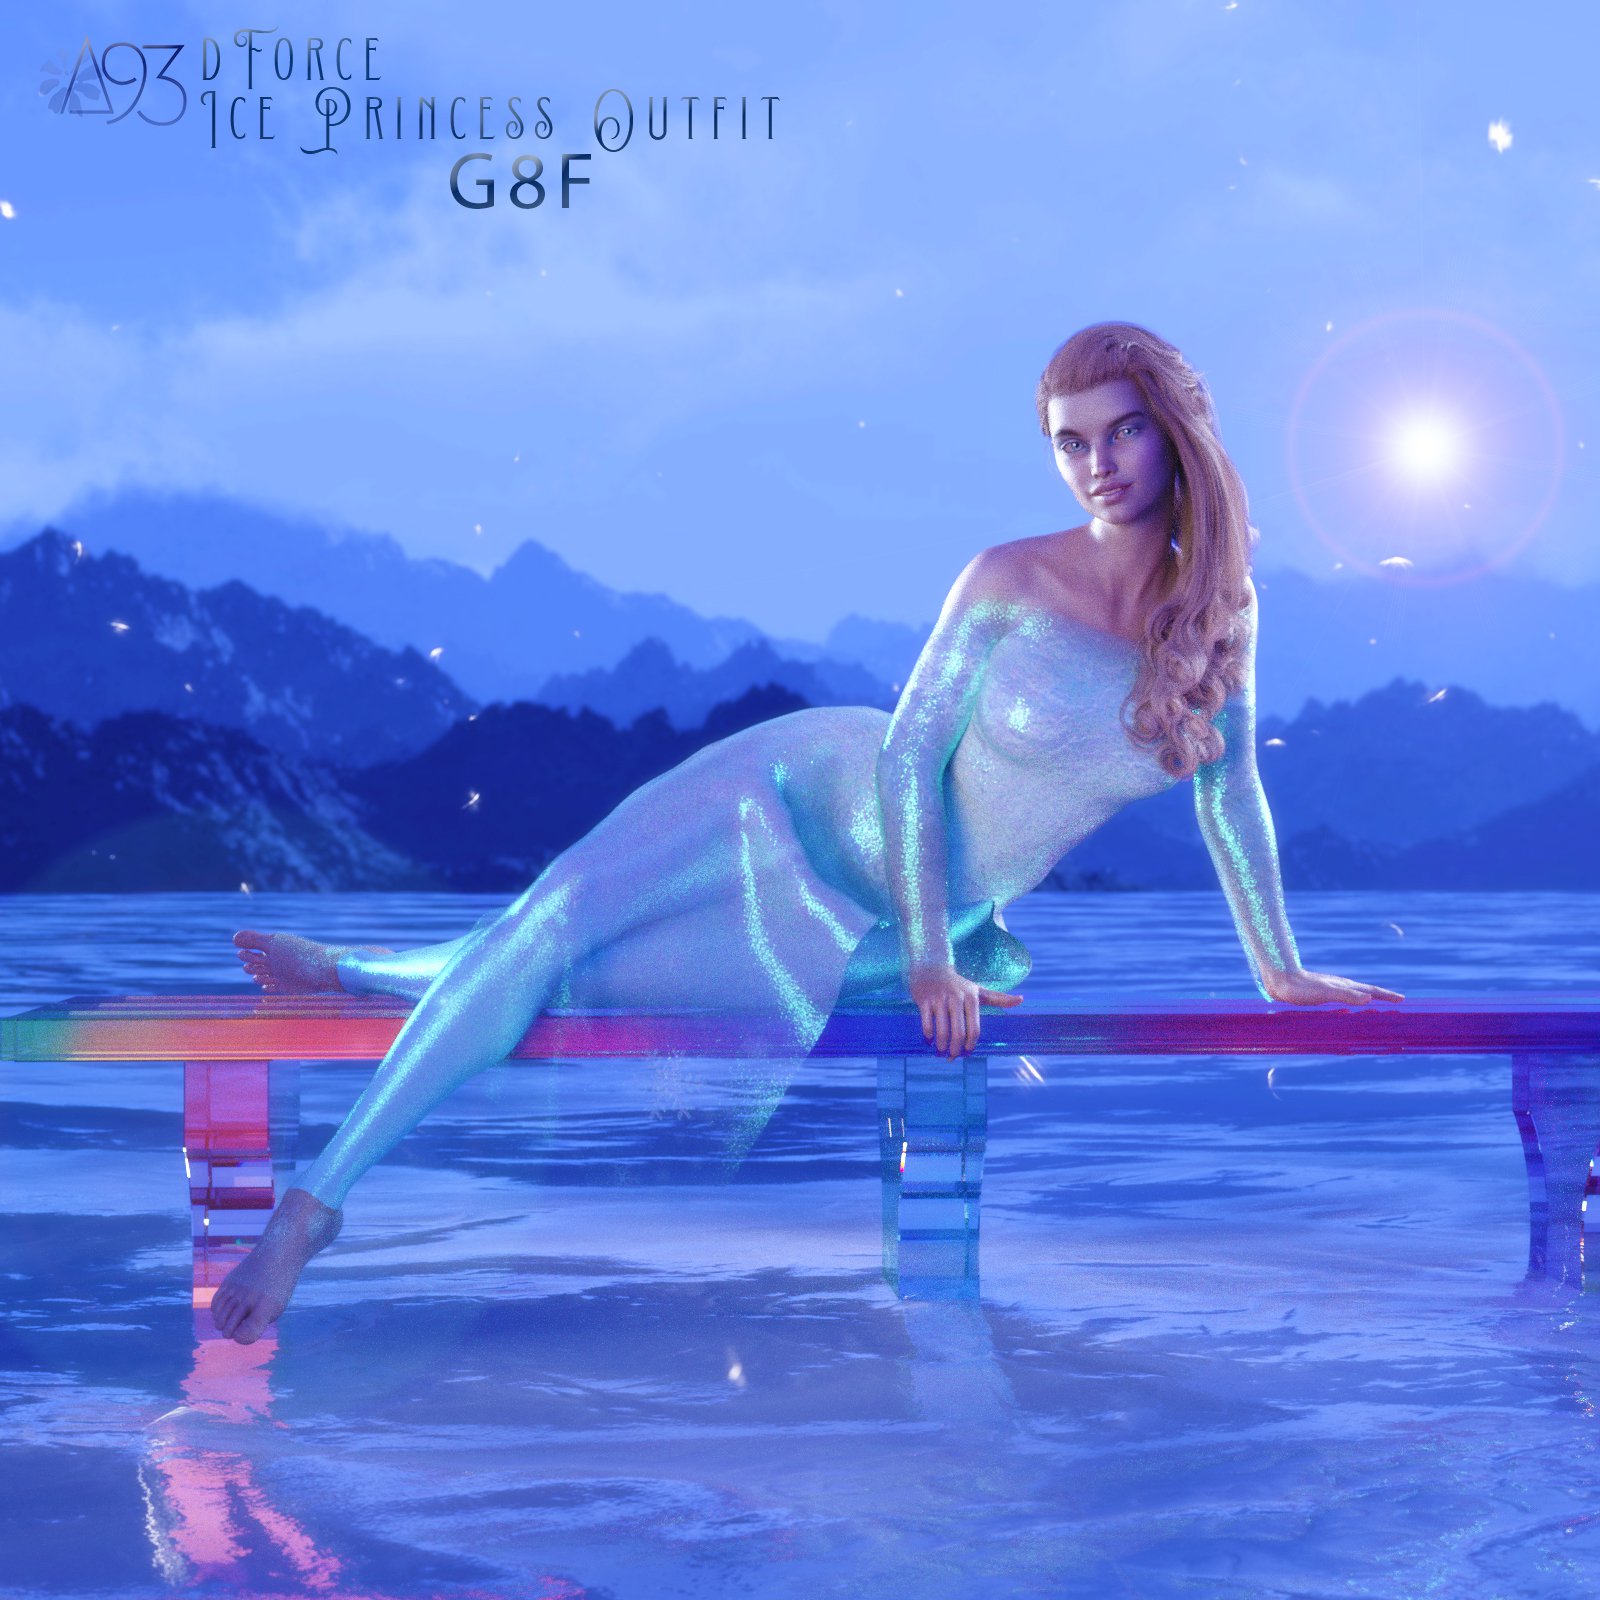 a93 – Ice Princess Outfit for G8F_DAZ3D下载站